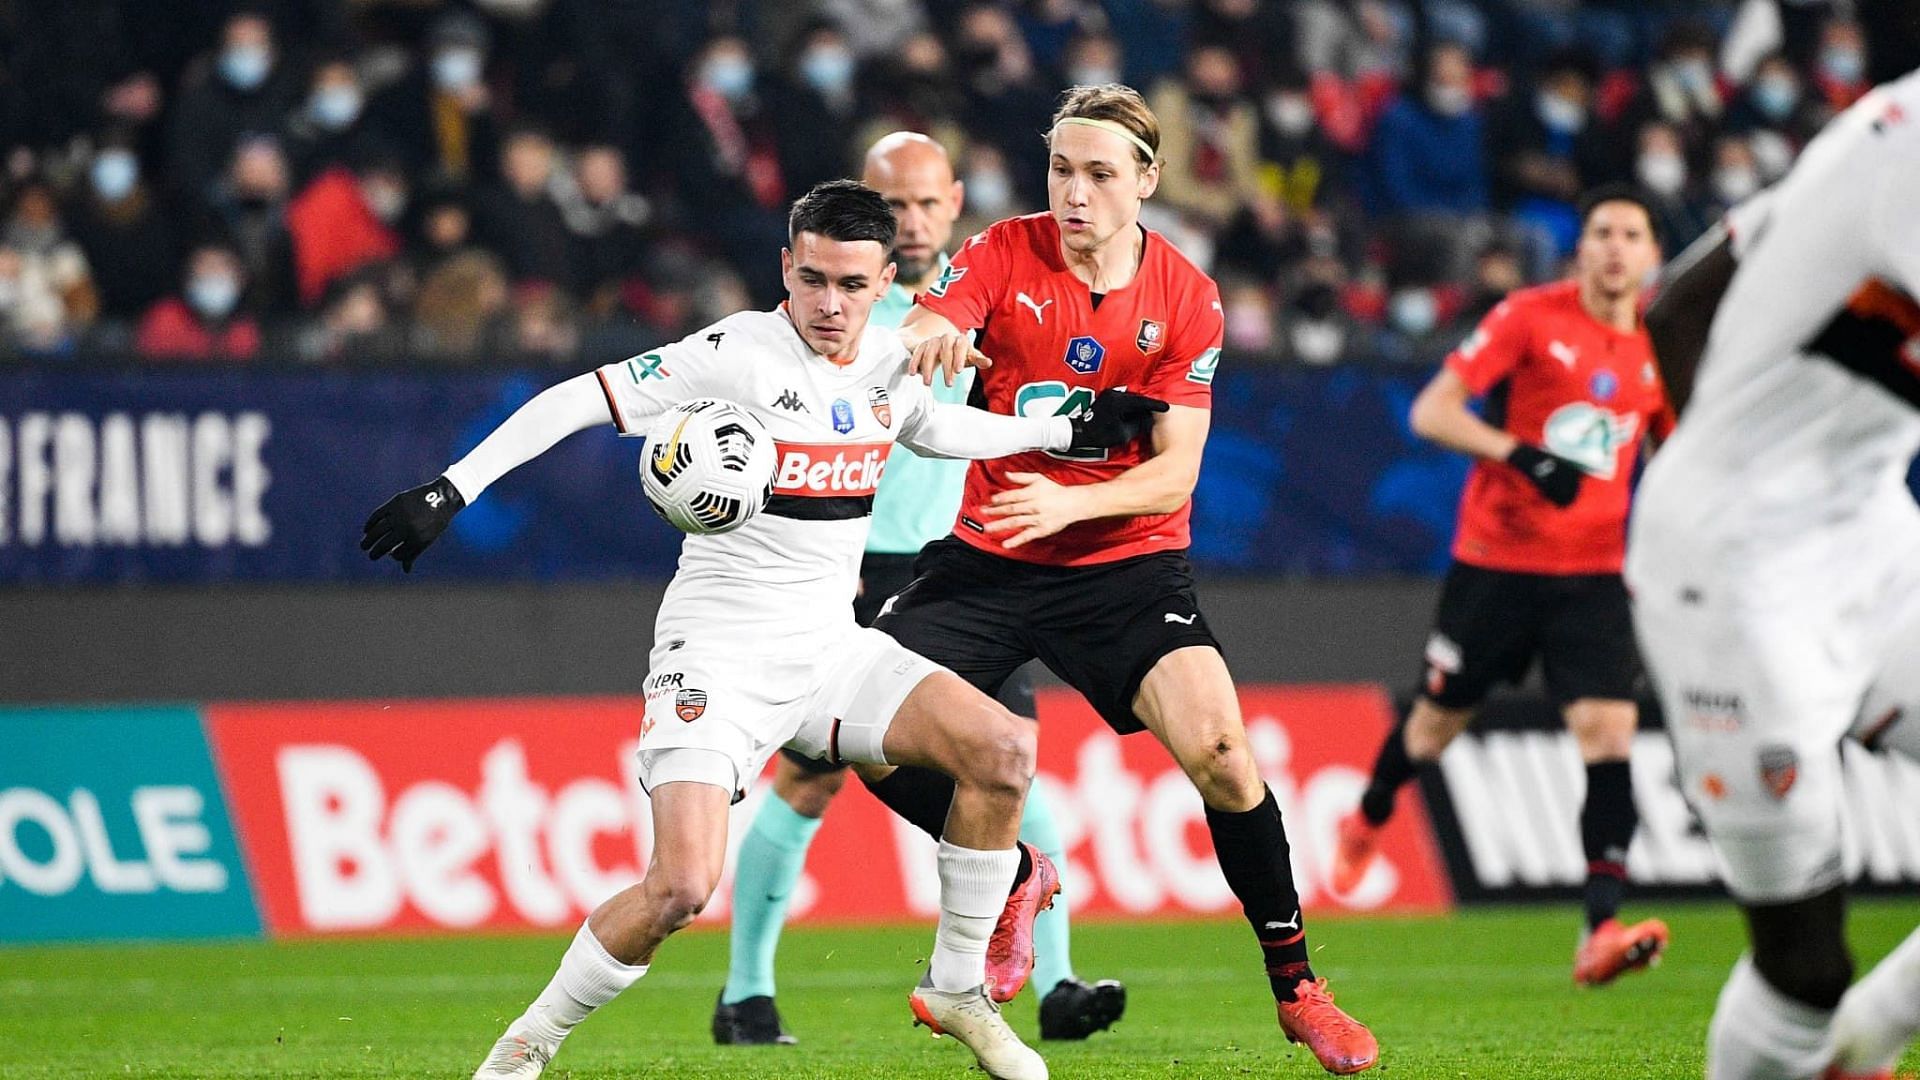 Rennes face Lorient in Ligue 1 on Sunday.